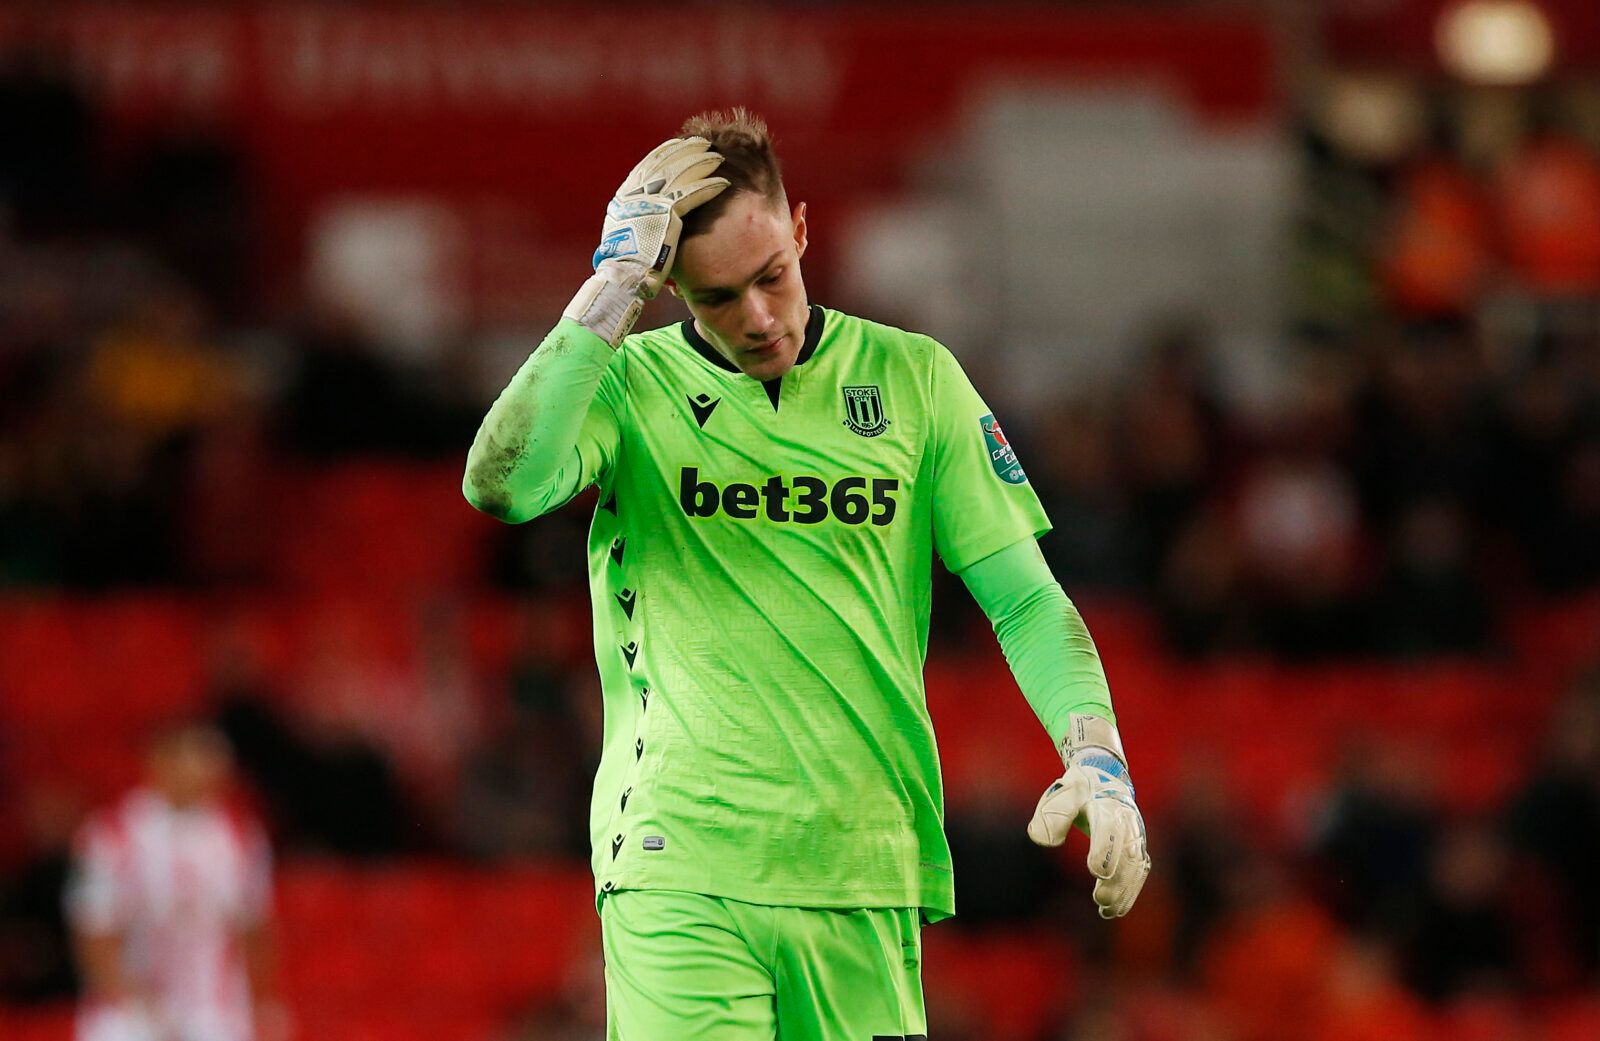 Soccer Football - Carabao Cup - Round of 16 - Stoke City v Brentford - bet365 Stadium, Stoke-on-Trent, Britain - October 27, 2021  Stoke City's Josef Bursik looks dejected Action Images via Reuters/Craig Brough EDITORIAL USE ONLY. No use with unauthorized audio, video, data, fixture lists, club/league logos or 'live' services. Online in-match use limited to 75 images, no video emulation. No use in betting, games or single club /league/player publications.  Please contact your account representat